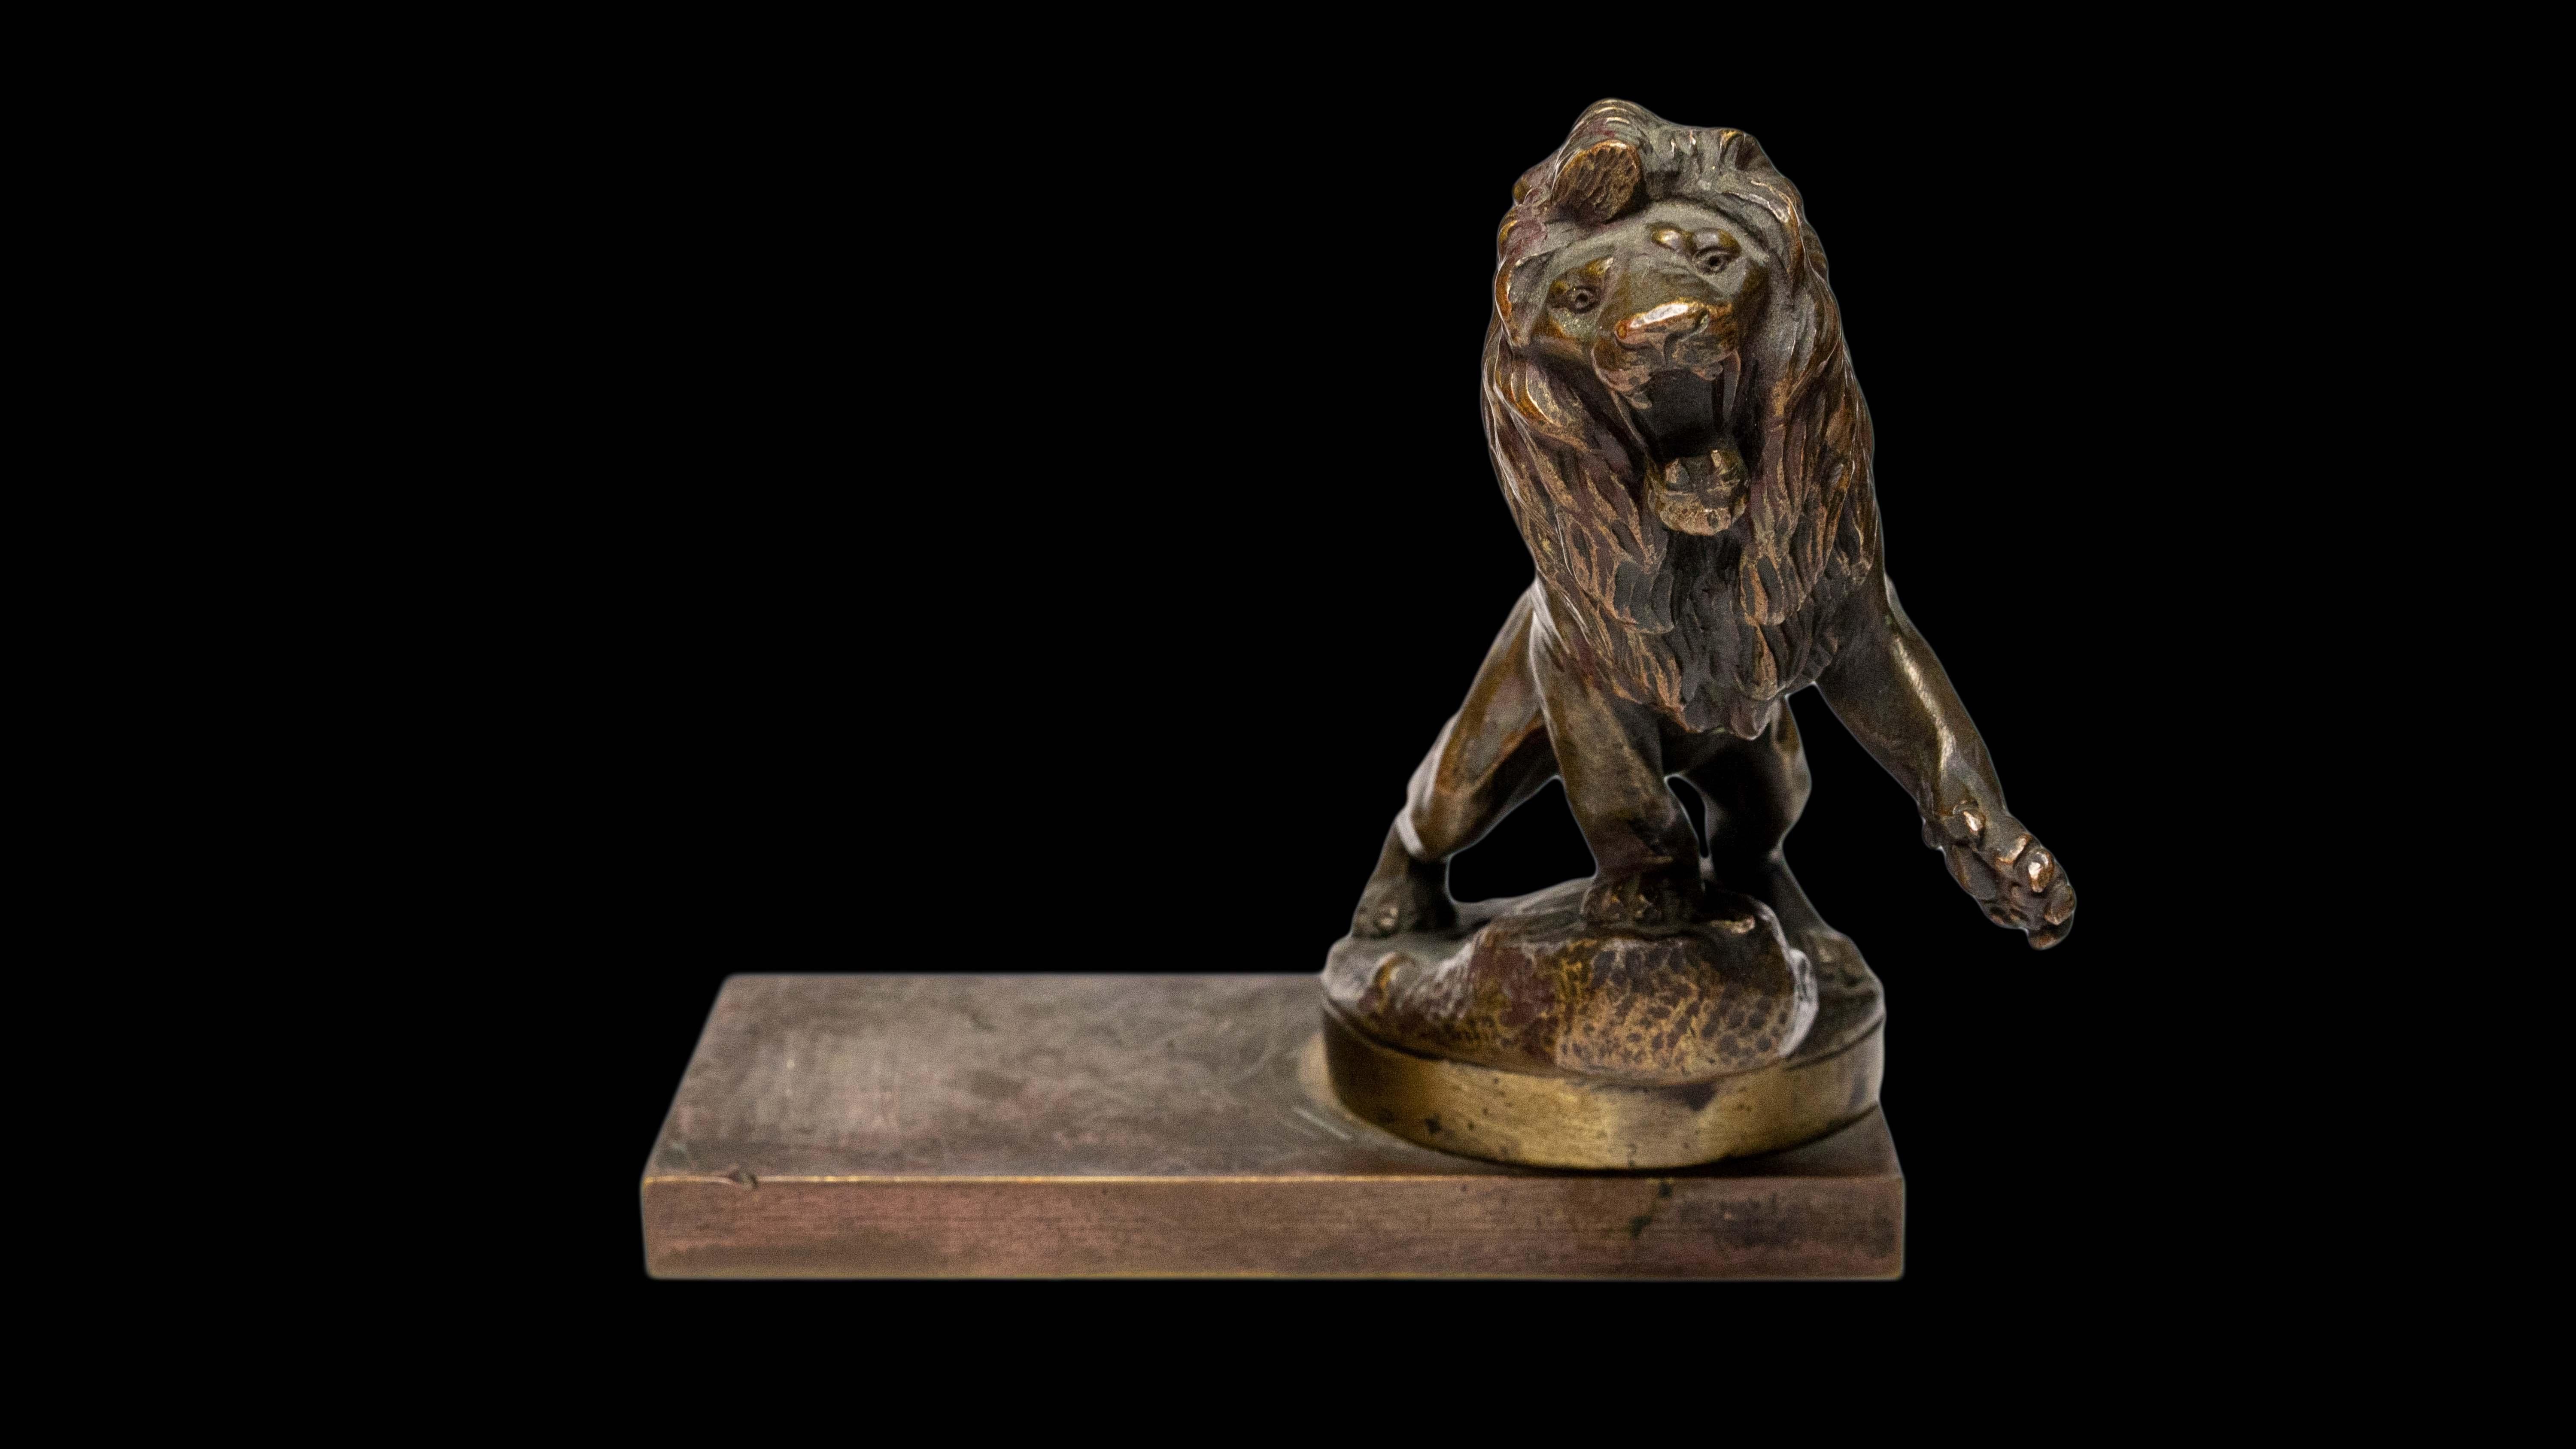 Early 20th century bronze Peugeot Lion radiator ornament by Maurice Roger Marx (1872-1956) mounted on antique die stamp:

Measures: 5.5